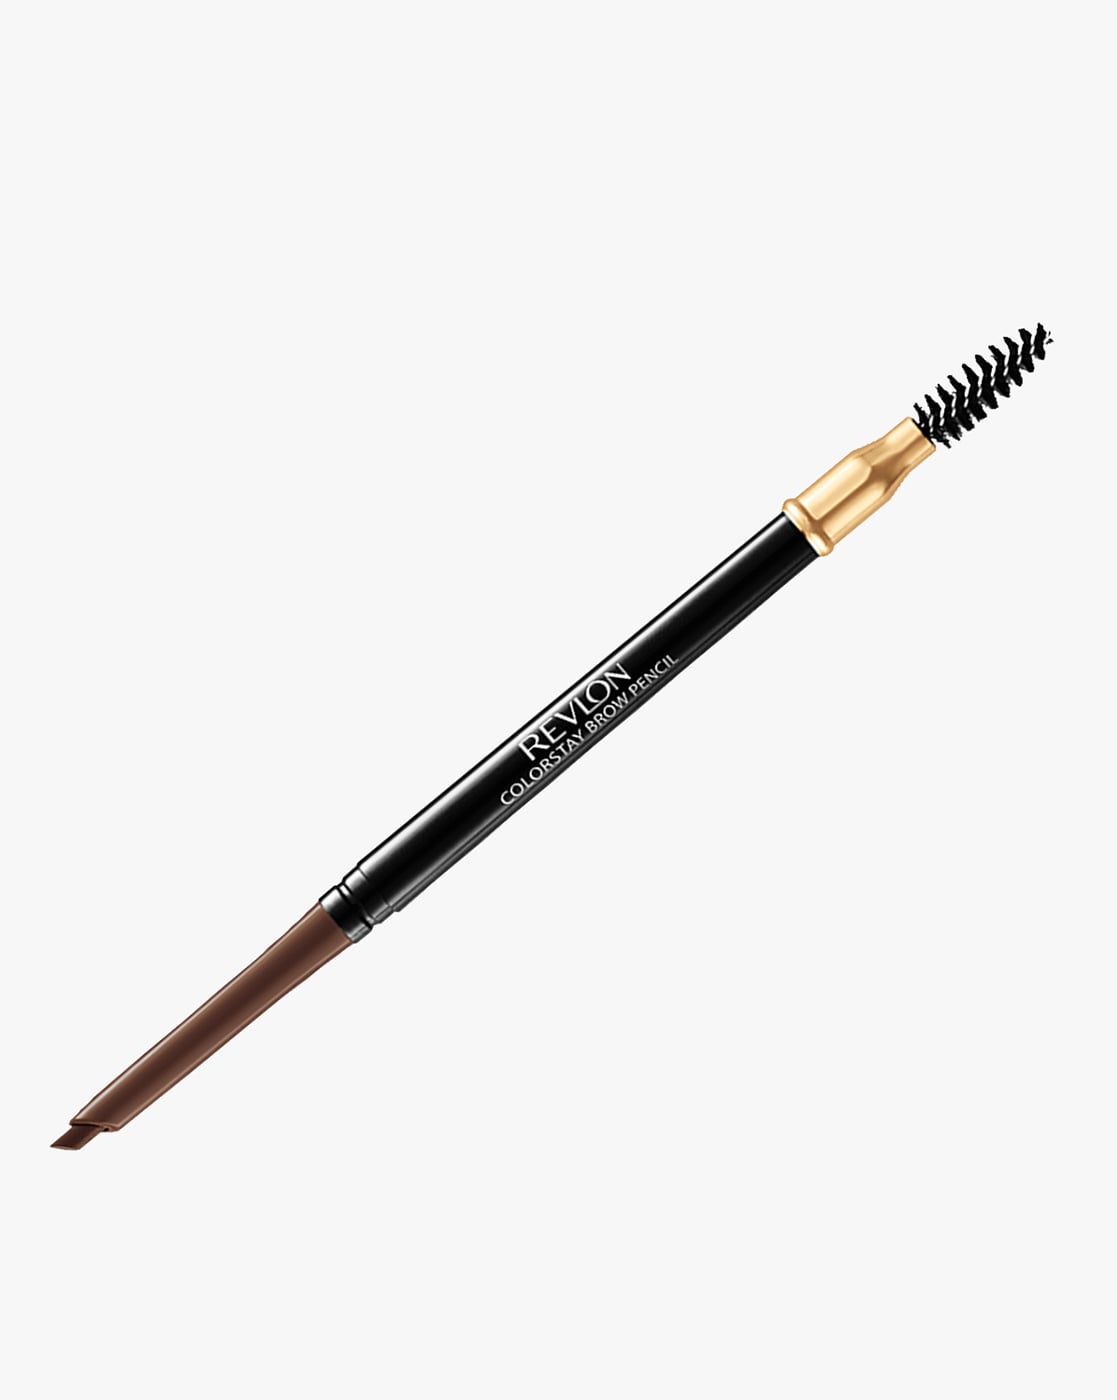 Buy Now - Revlon Colorstay Semi-Permanent Brow 360 Blonde Ink: Waterproof &  Sweat-Proof Formula for a Natural-Looking Finish that Lasts up to 3 Days